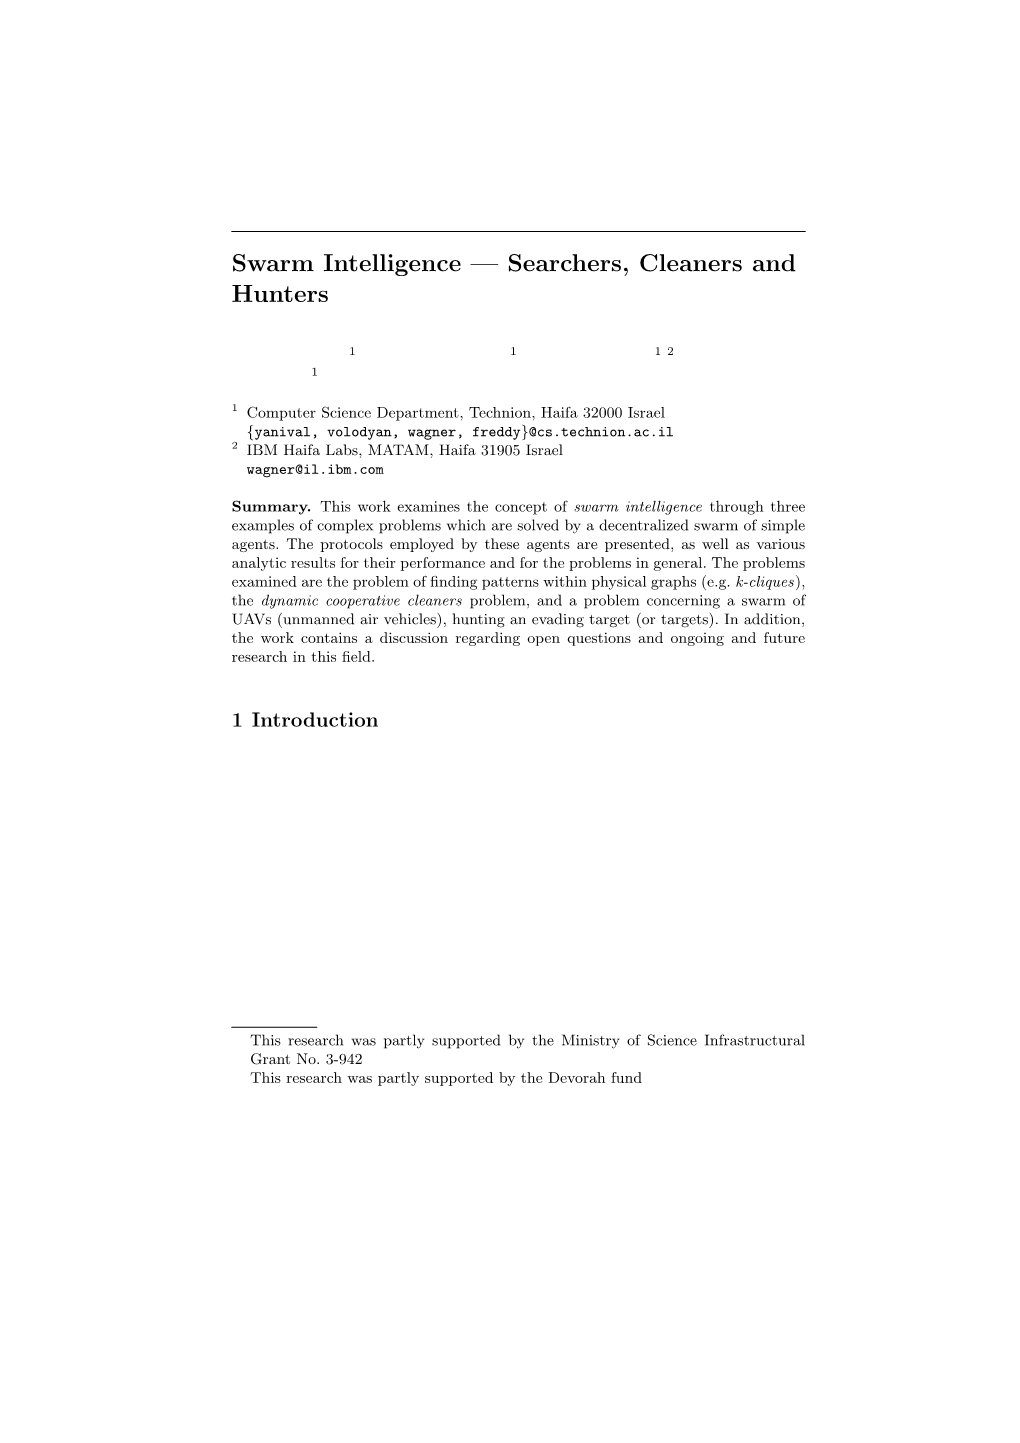 Swarm Intelligence — Searchers, Cleaners and Hunters * **